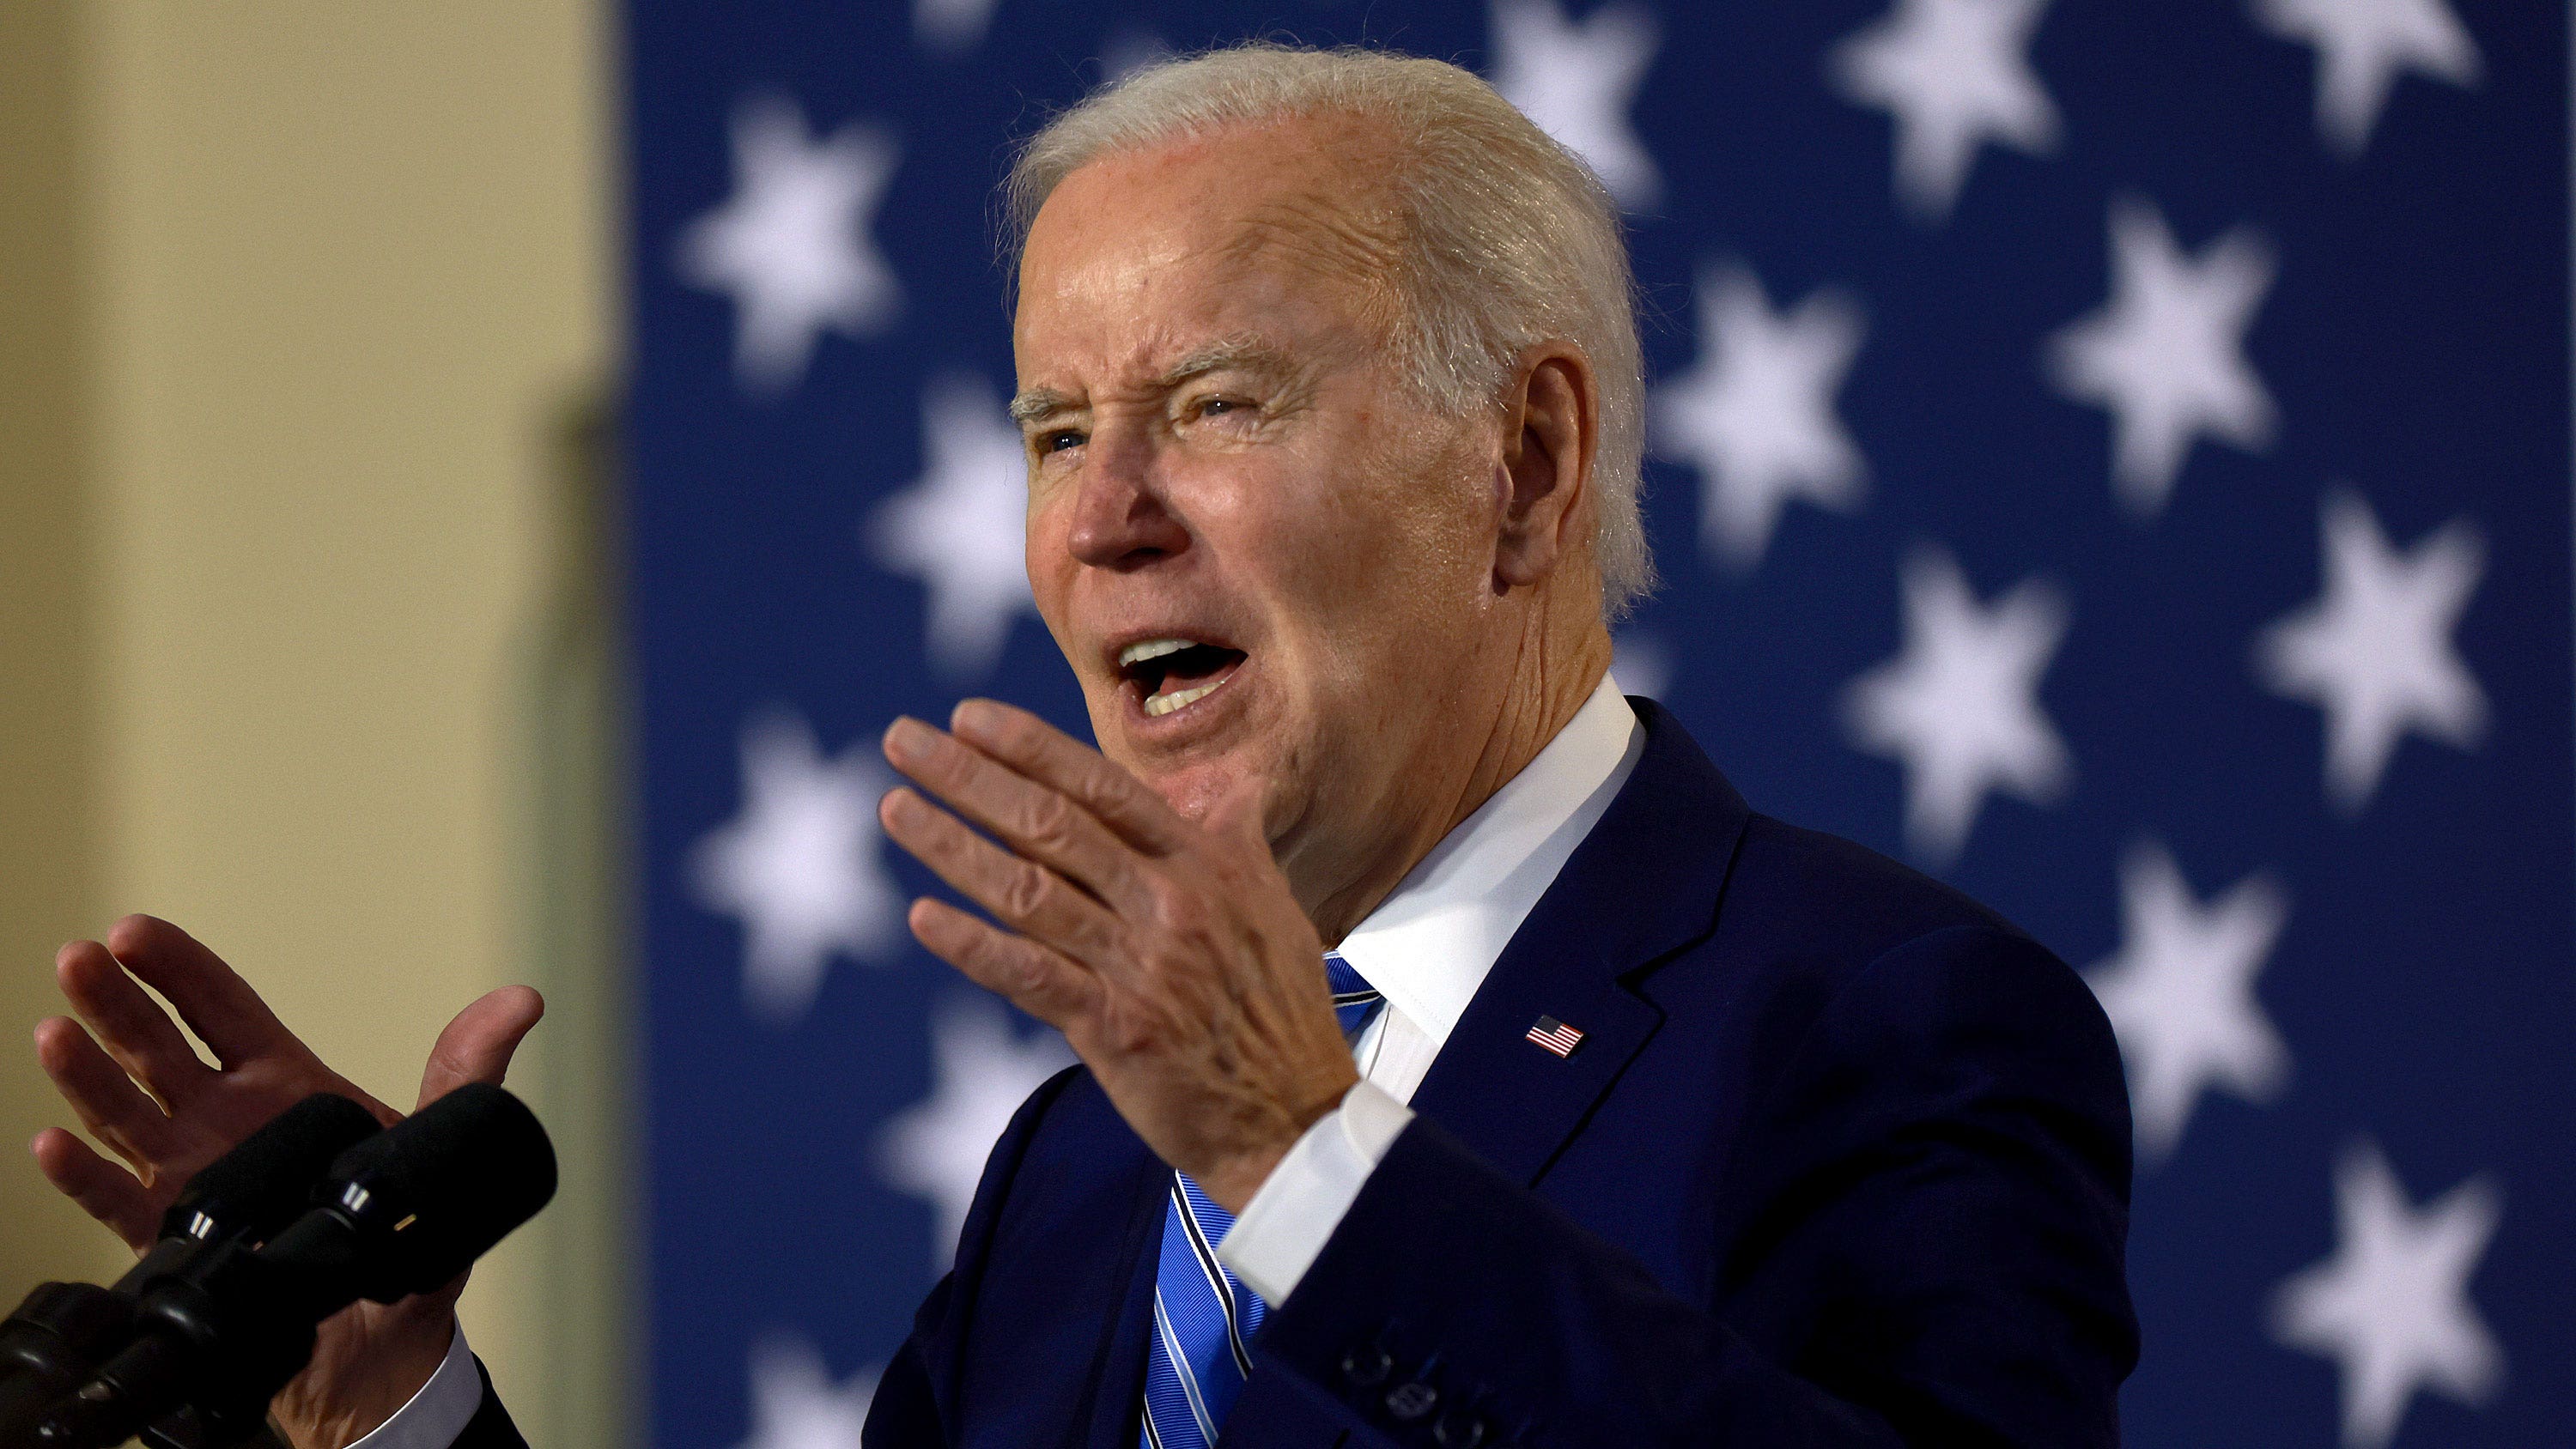 Person alleging Biden criminal bribery scheme is a 'highly credible' FBI source used since Obama admin: Source